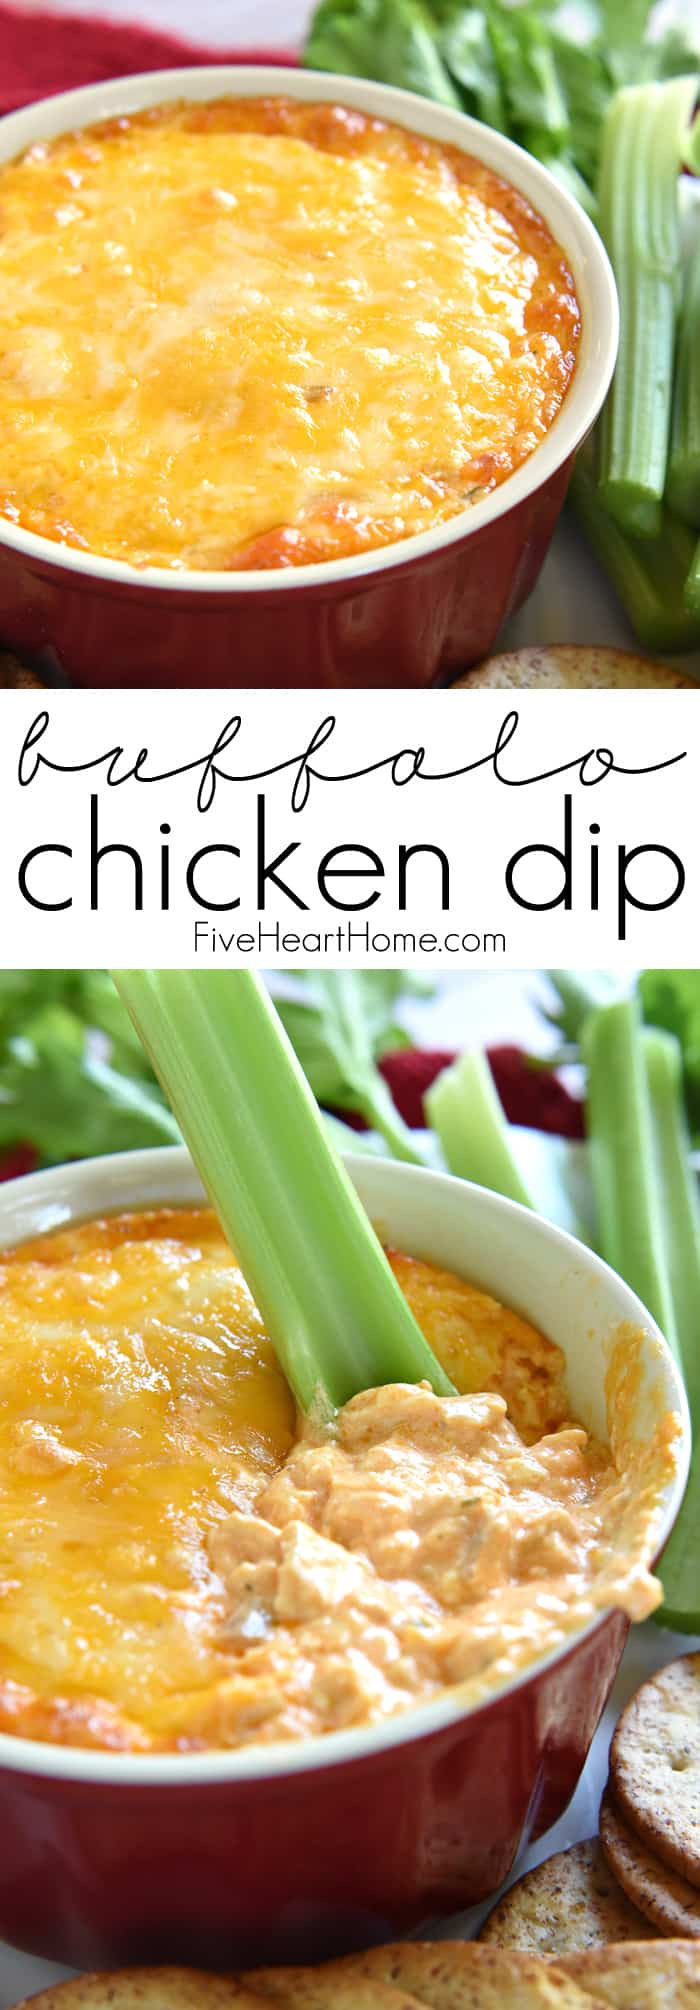 Buffalo Chicken Appetizers
 Buffalo Chicken Dip warm creamy and loaded with cheese